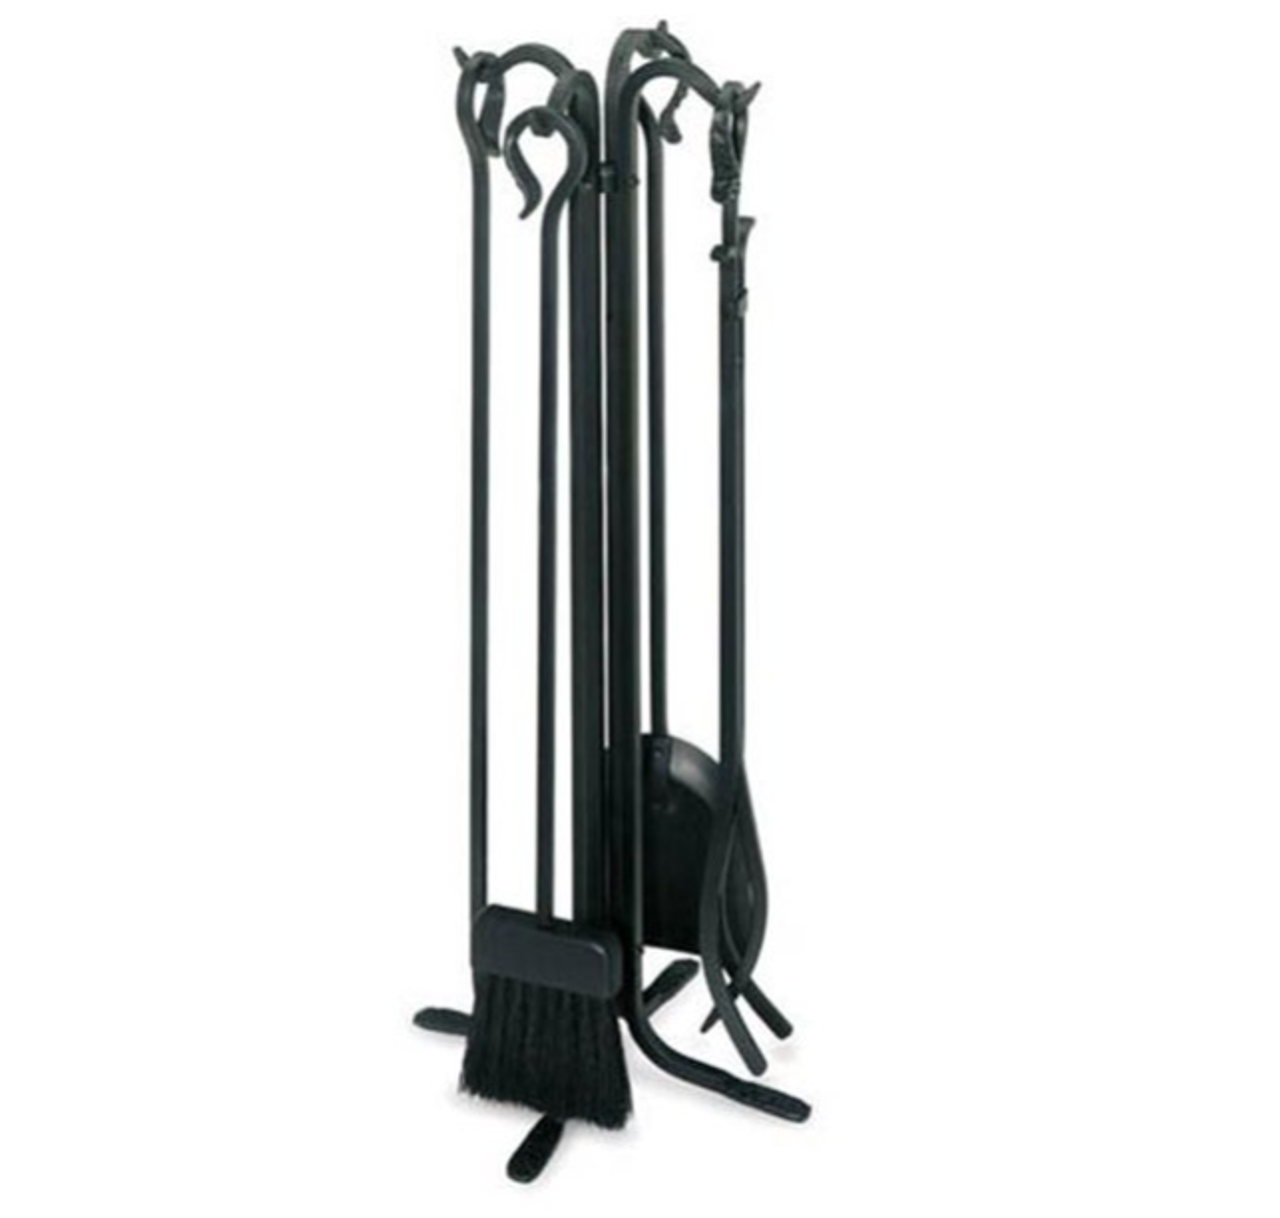 28" Forged Iron Tool Set in Matte Black